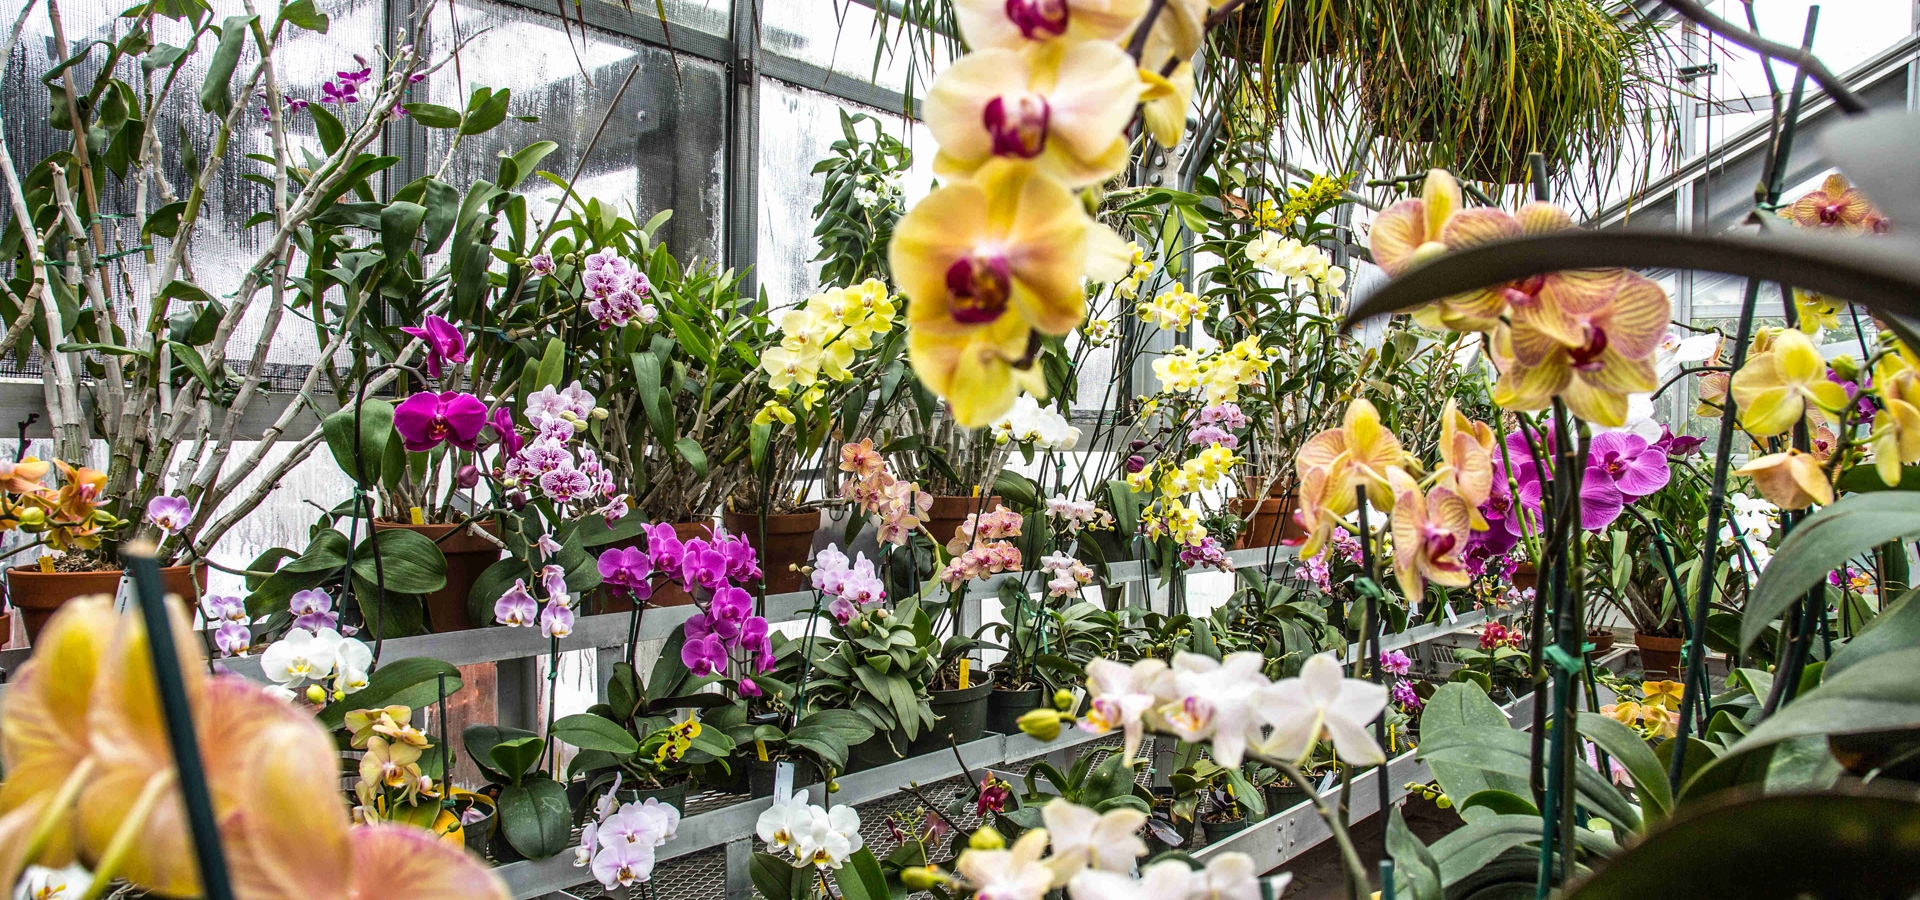 Orchids in the greenhouse